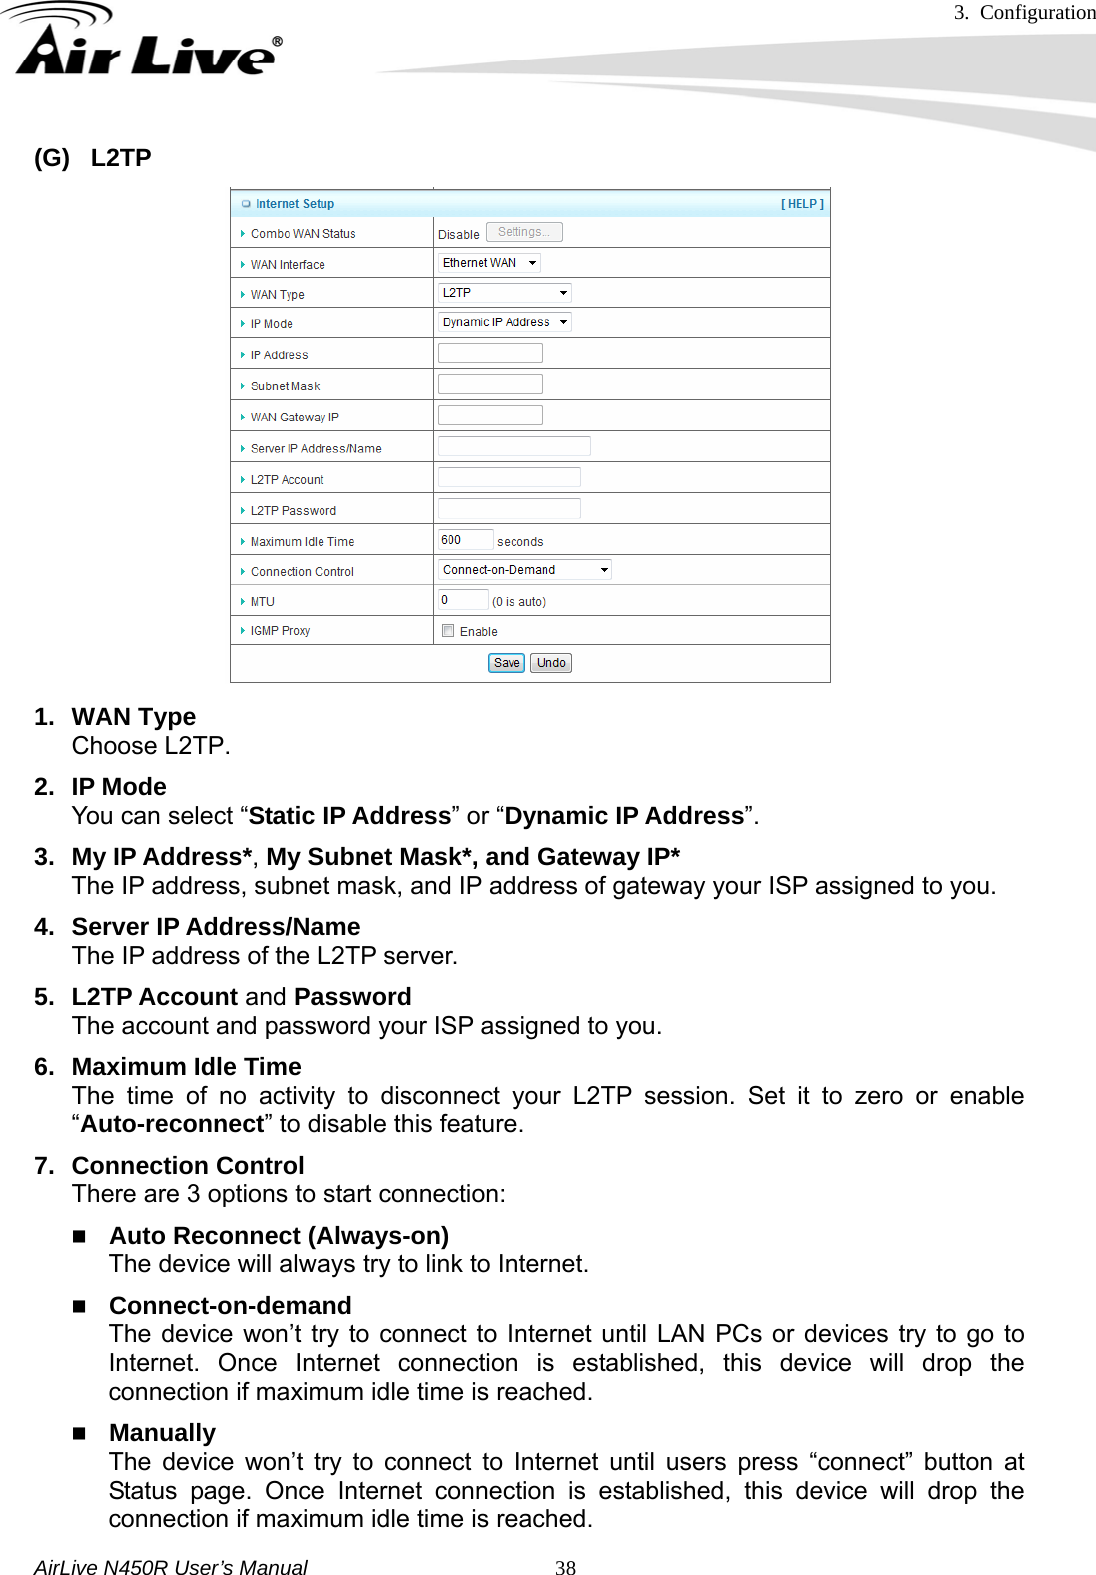 3. Configuration     AirLive N450R User’s Manual   38(G) L2TP                    1. WAN Type Choose L2TP. 2. IP Mode You can select “Static IP Address” or “Dynamic IP Address”.  3. My IP Address*, My Subnet Mask*, and Gateway IP* The IP address, subnet mask, and IP address of gateway your ISP assigned to you. 4. Server IP Address/Name The IP address of the L2TP server. 5. L2TP Account and Password The account and password your ISP assigned to you. 6. Maximum Idle Time The time of no activity to disconnect your L2TP session. Set it to zero or enable “Auto-reconnect” to disable this feature. 7. Connection Control There are 3 options to start connection:    Auto Reconnect (Always-on) The device will always try to link to Internet.      Connect-on-demand The device won’t try to connect to Internet until LAN PCs or devices try to go to Internet. Once Internet connection is established, this device will drop the connection if maximum idle time is reached.  Manually The device won’t try to connect to Internet until users press “connect” button at Status page. Once Internet connection is established, this device will drop the connection if maximum idle time is reached. 